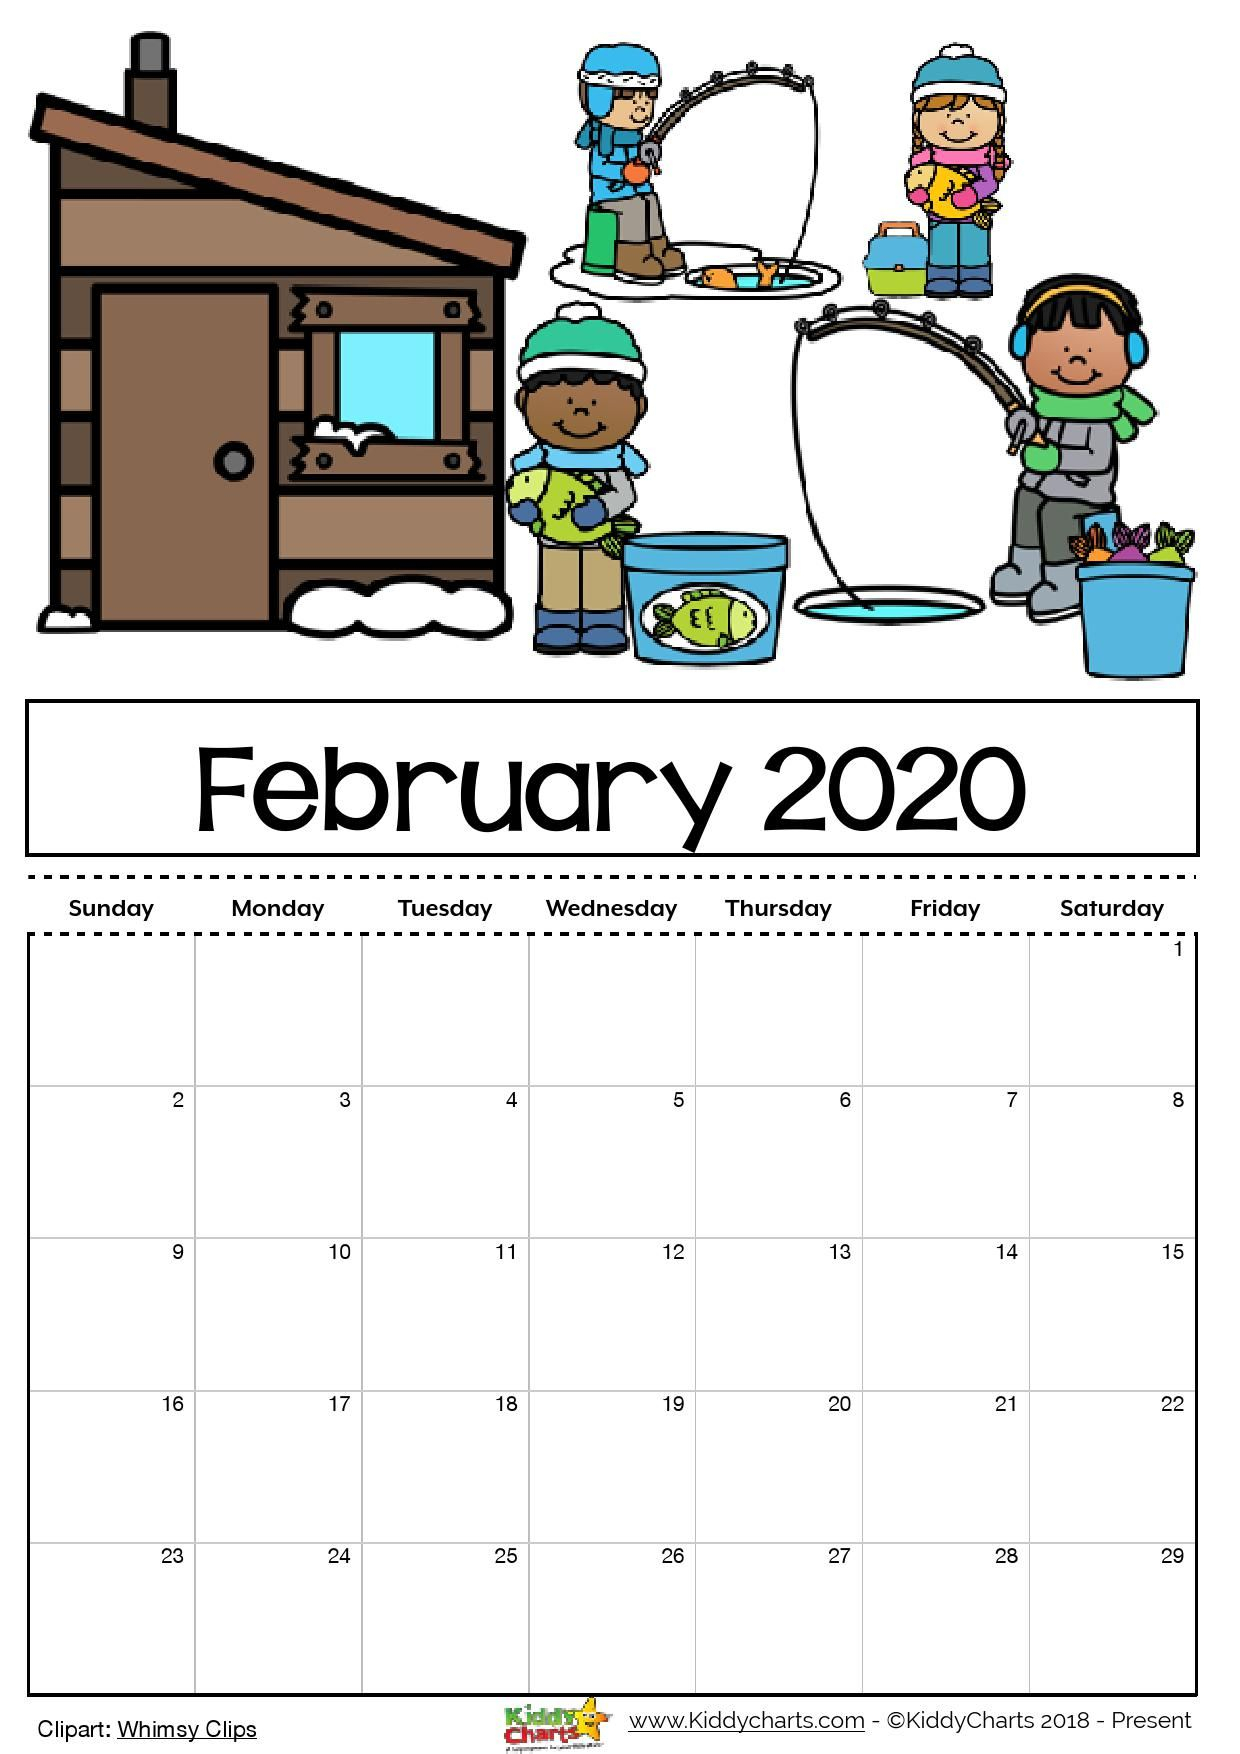 Check Out Our Free Editable 2020 Calendar Available For